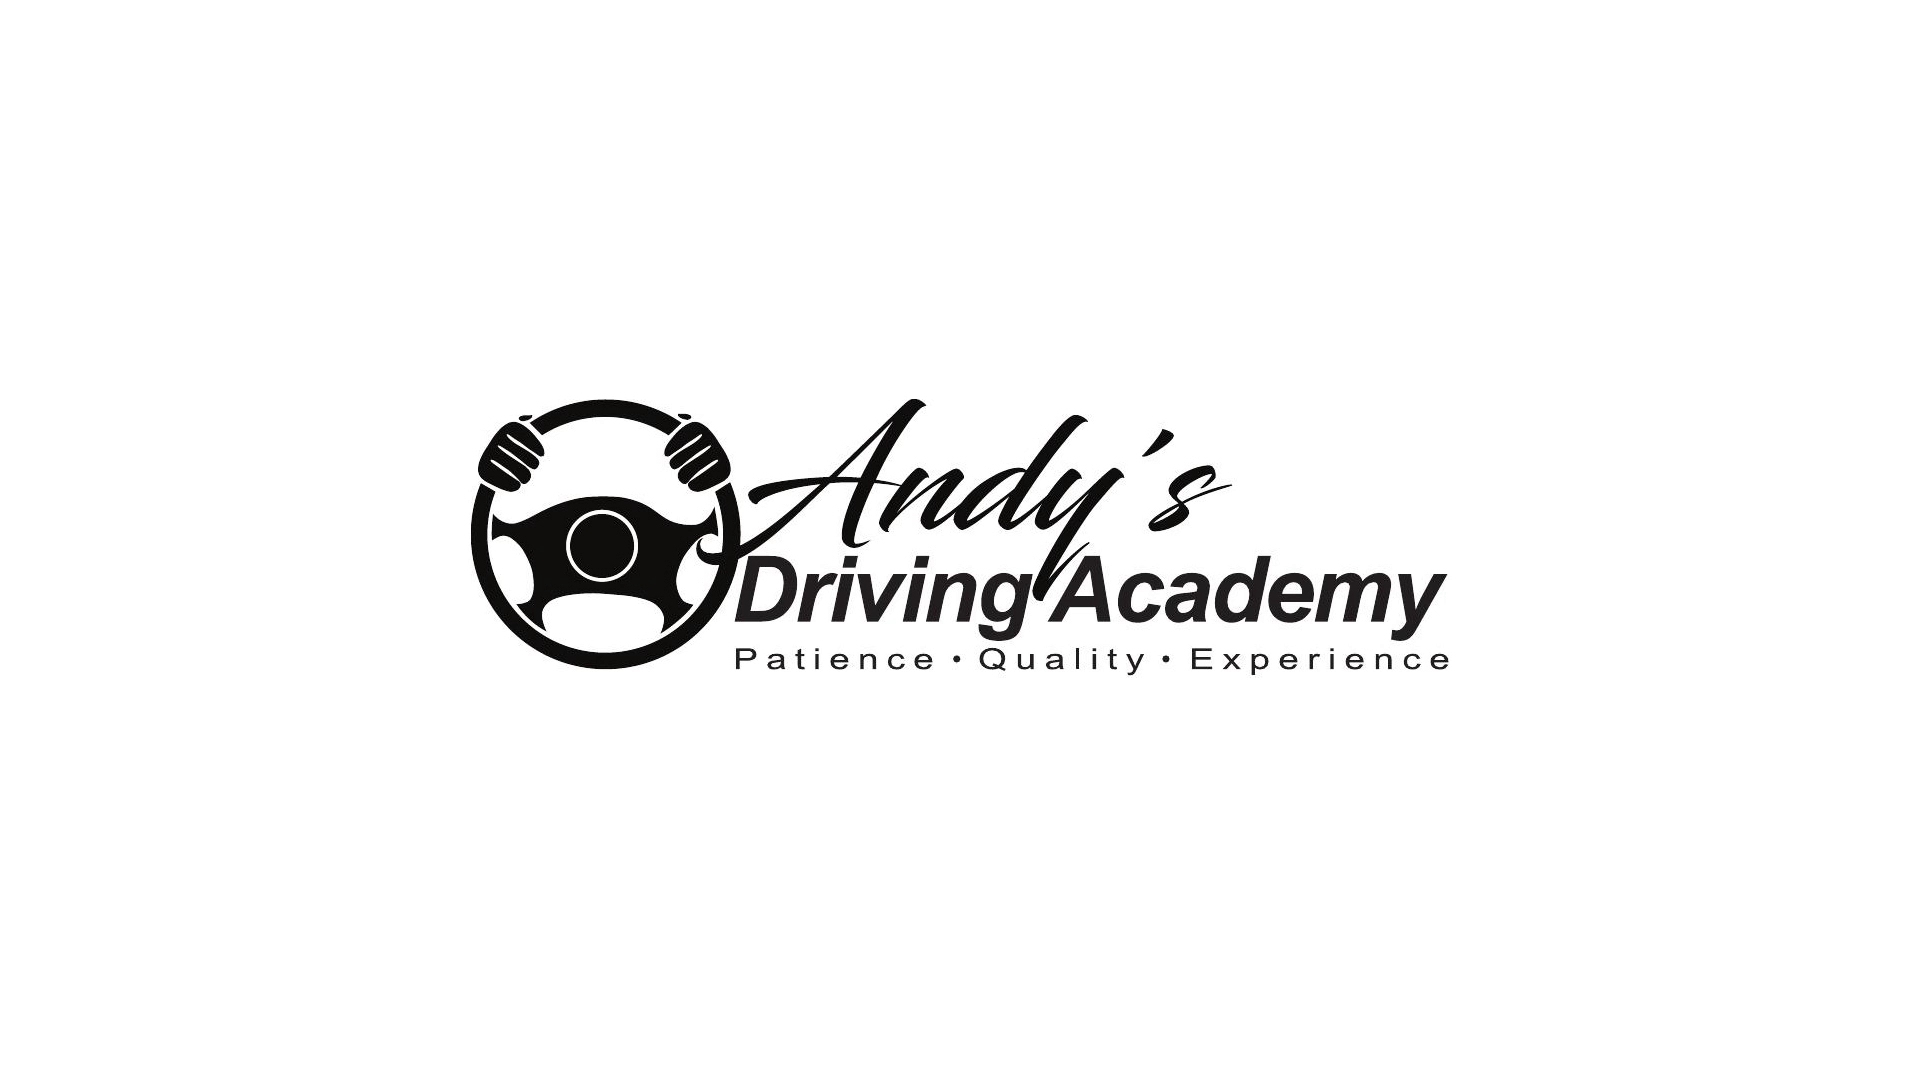 Andy's Driving Academy 26845 Point Lookout Rd, Leonardtown Maryland 20650